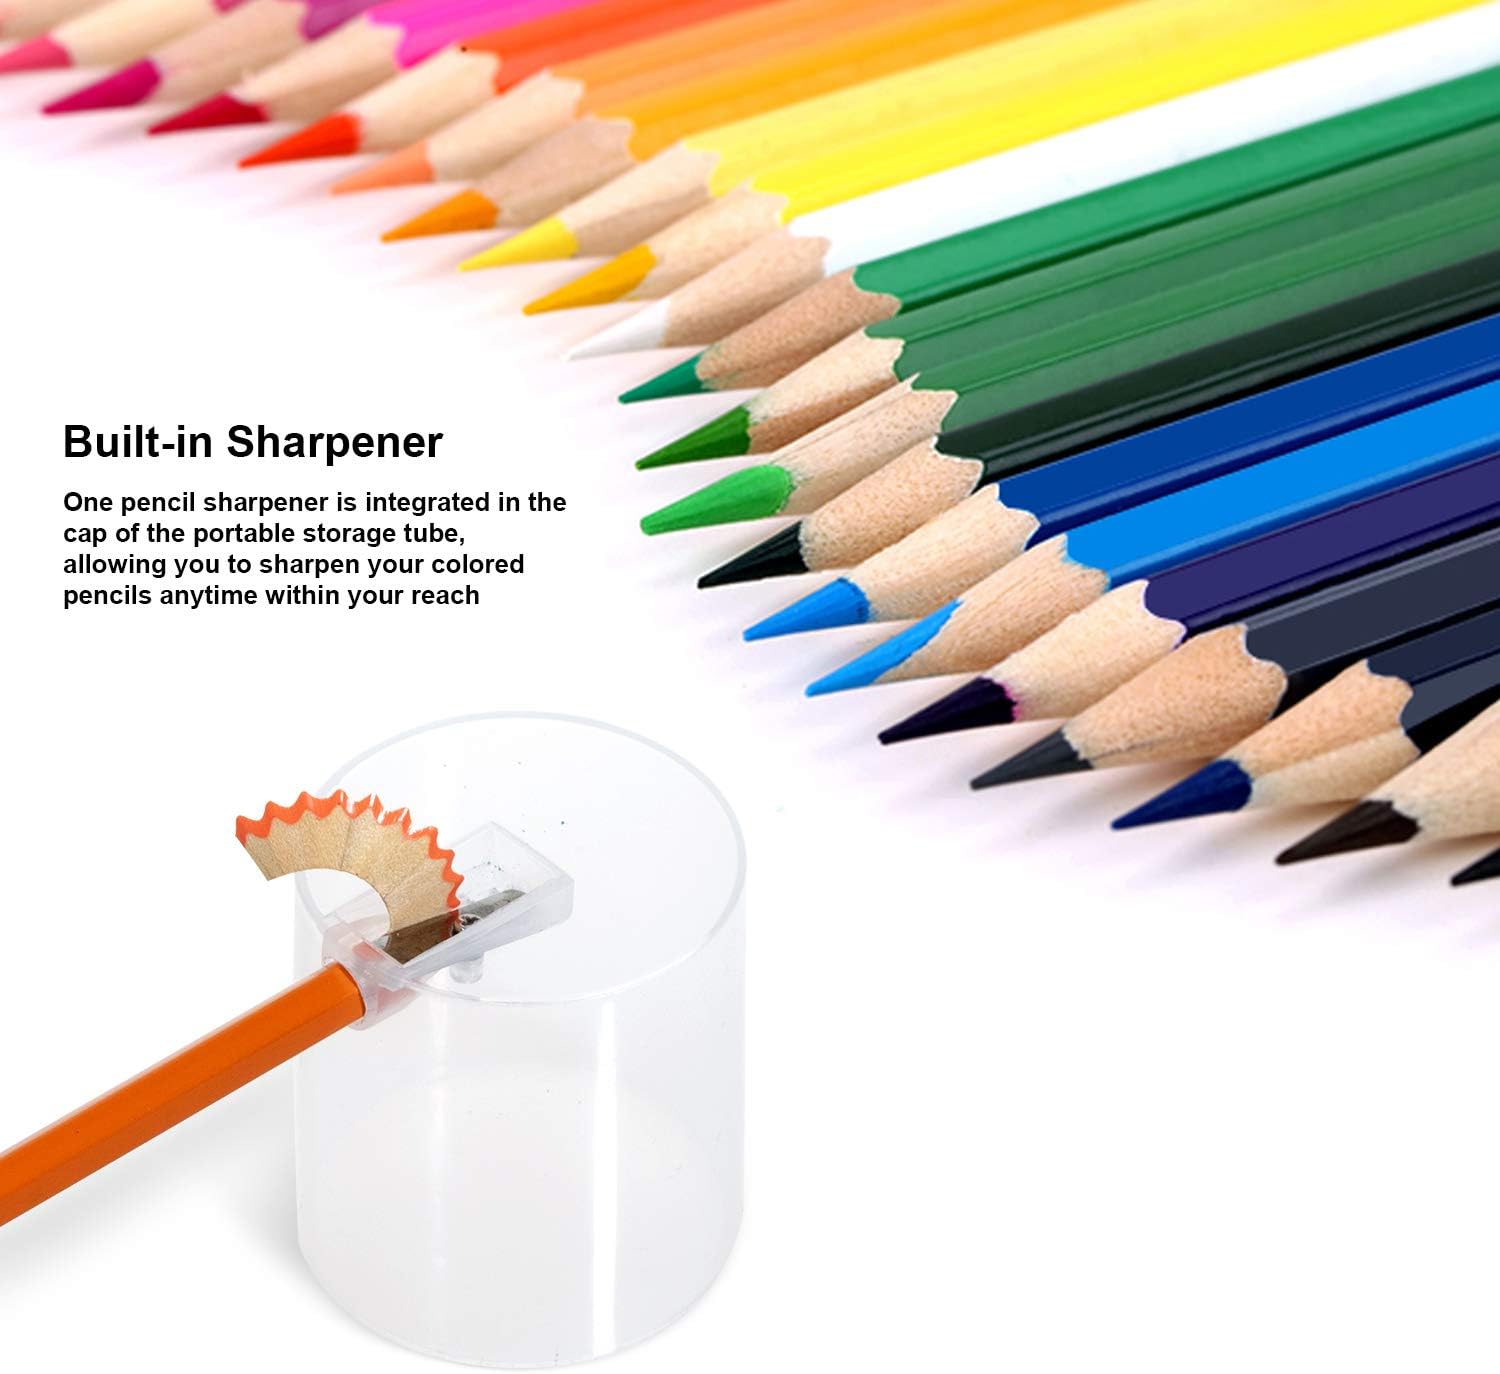 Deli 36 Colored Pencils with Built-in Sharpener in Tube Cap